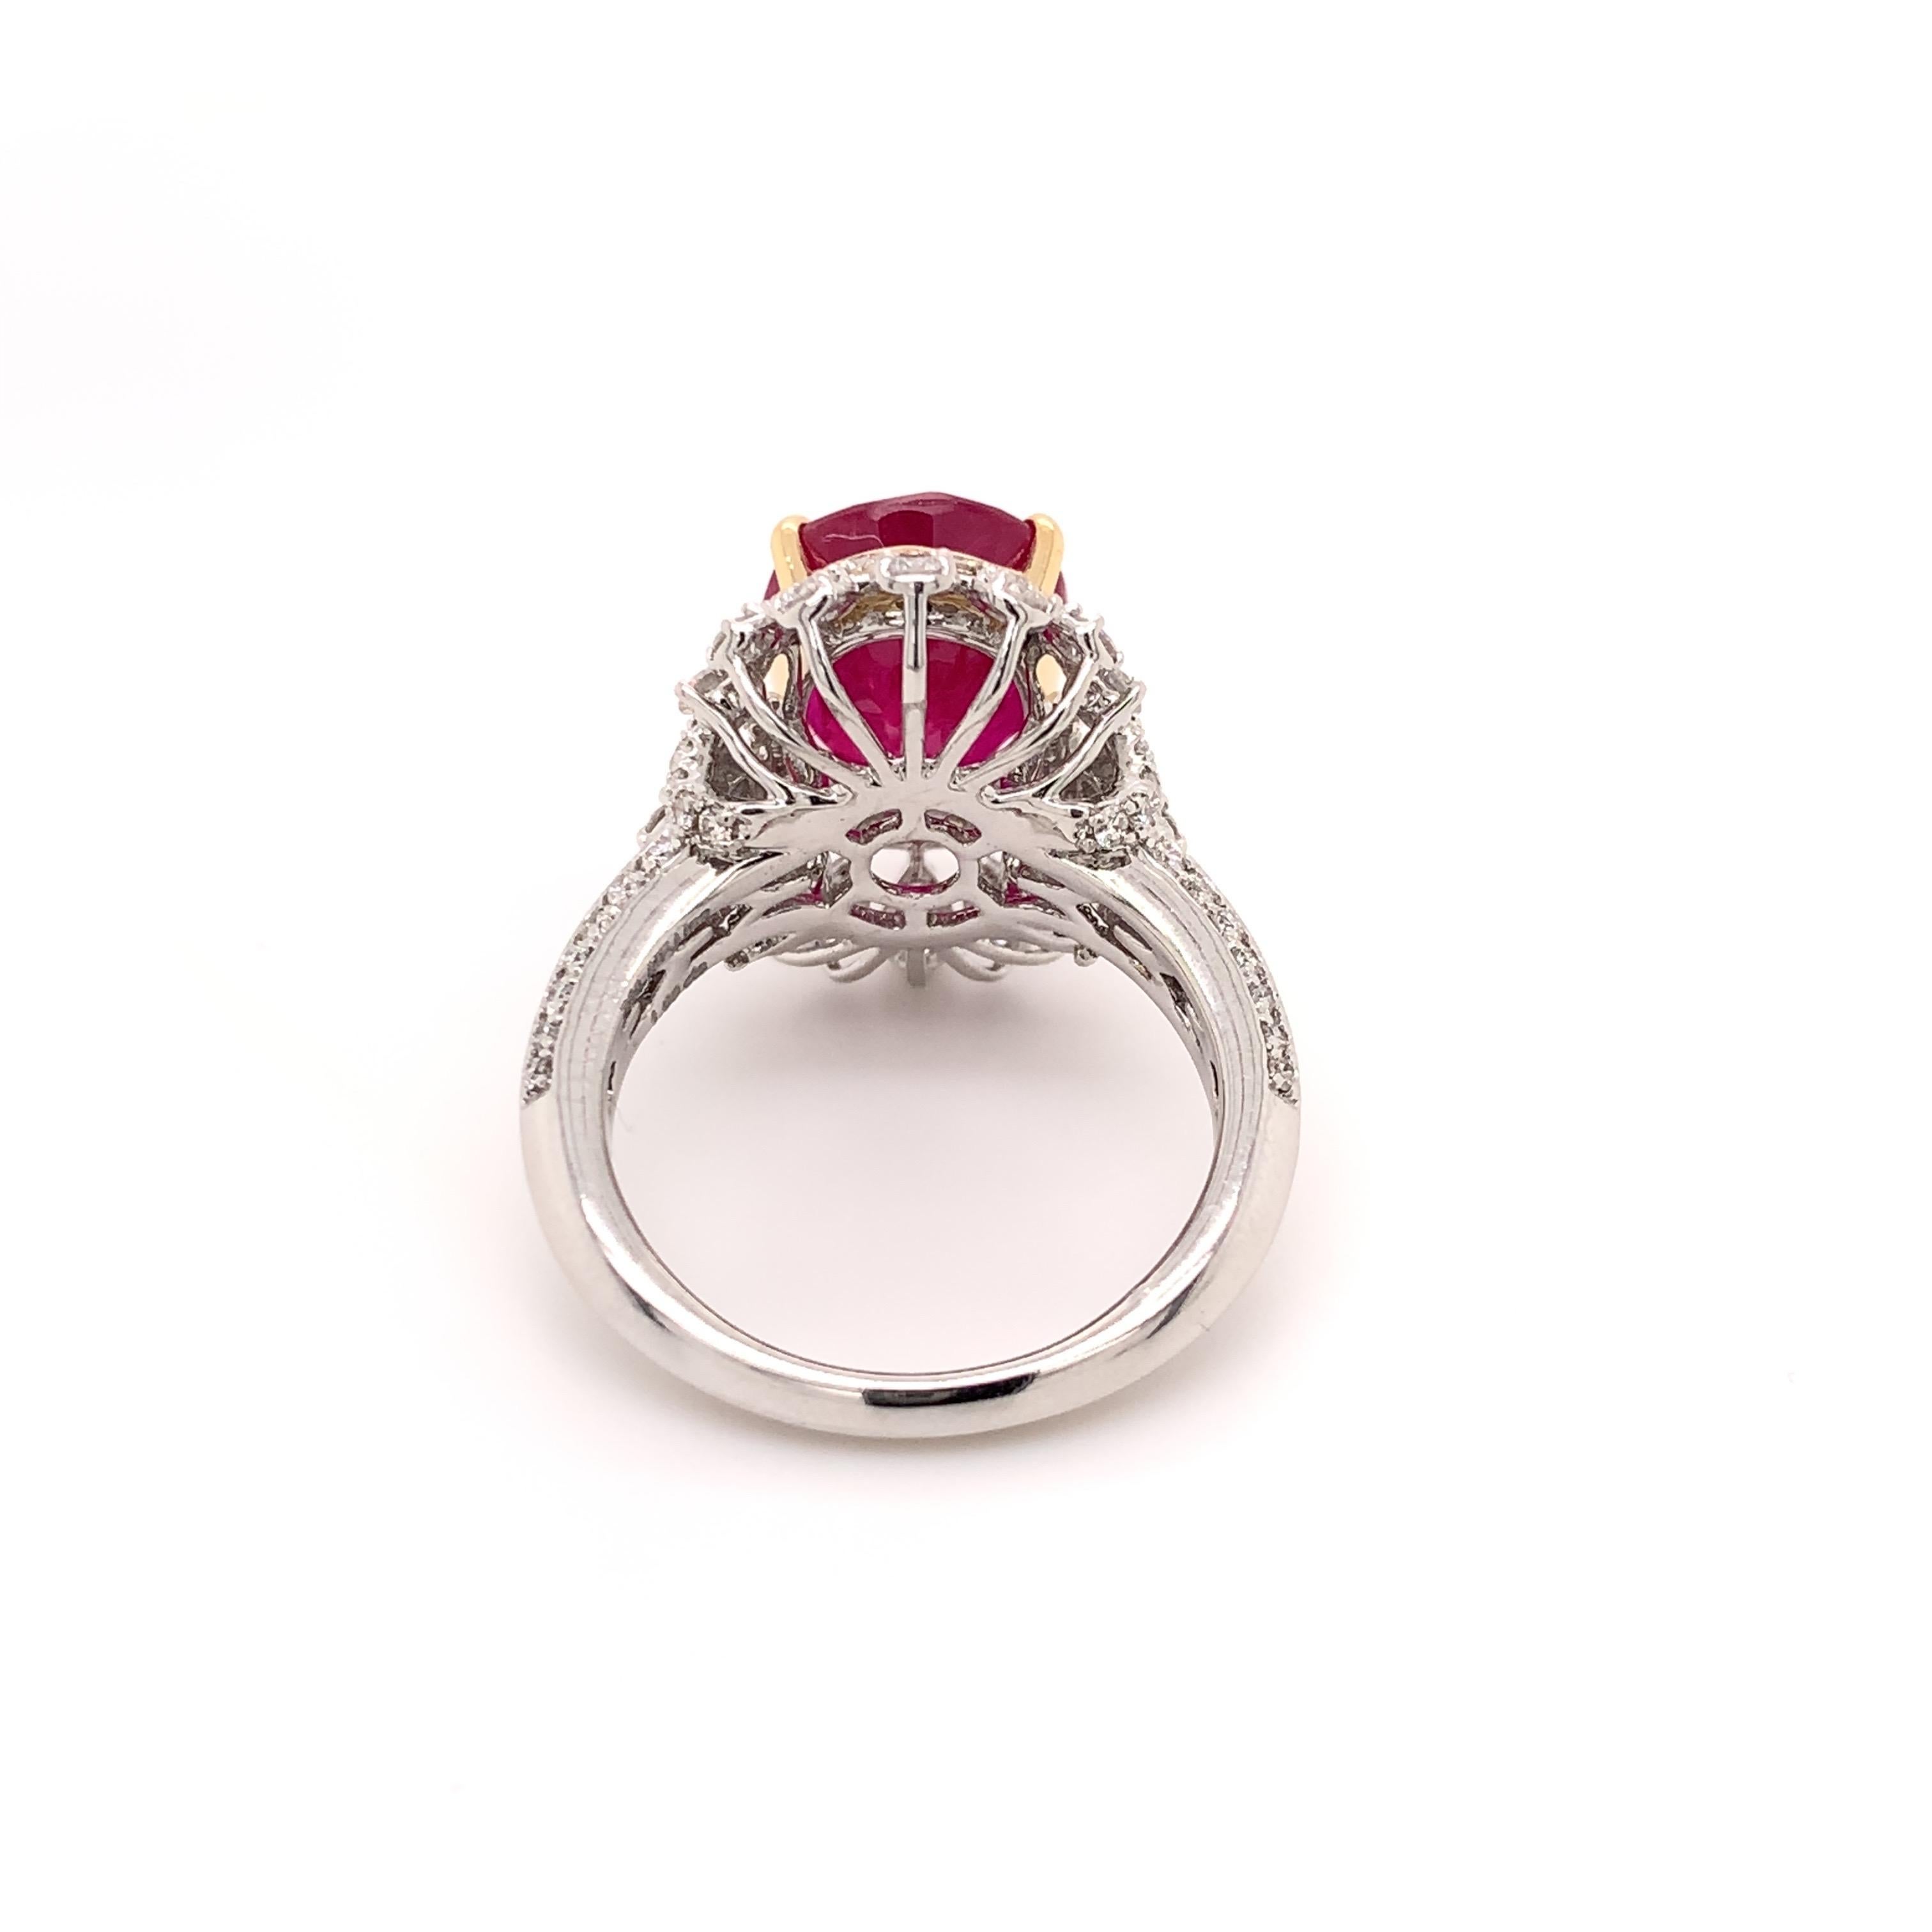 Contemporary 5.83 Carat Mozambique Ruby Cocktail Ring